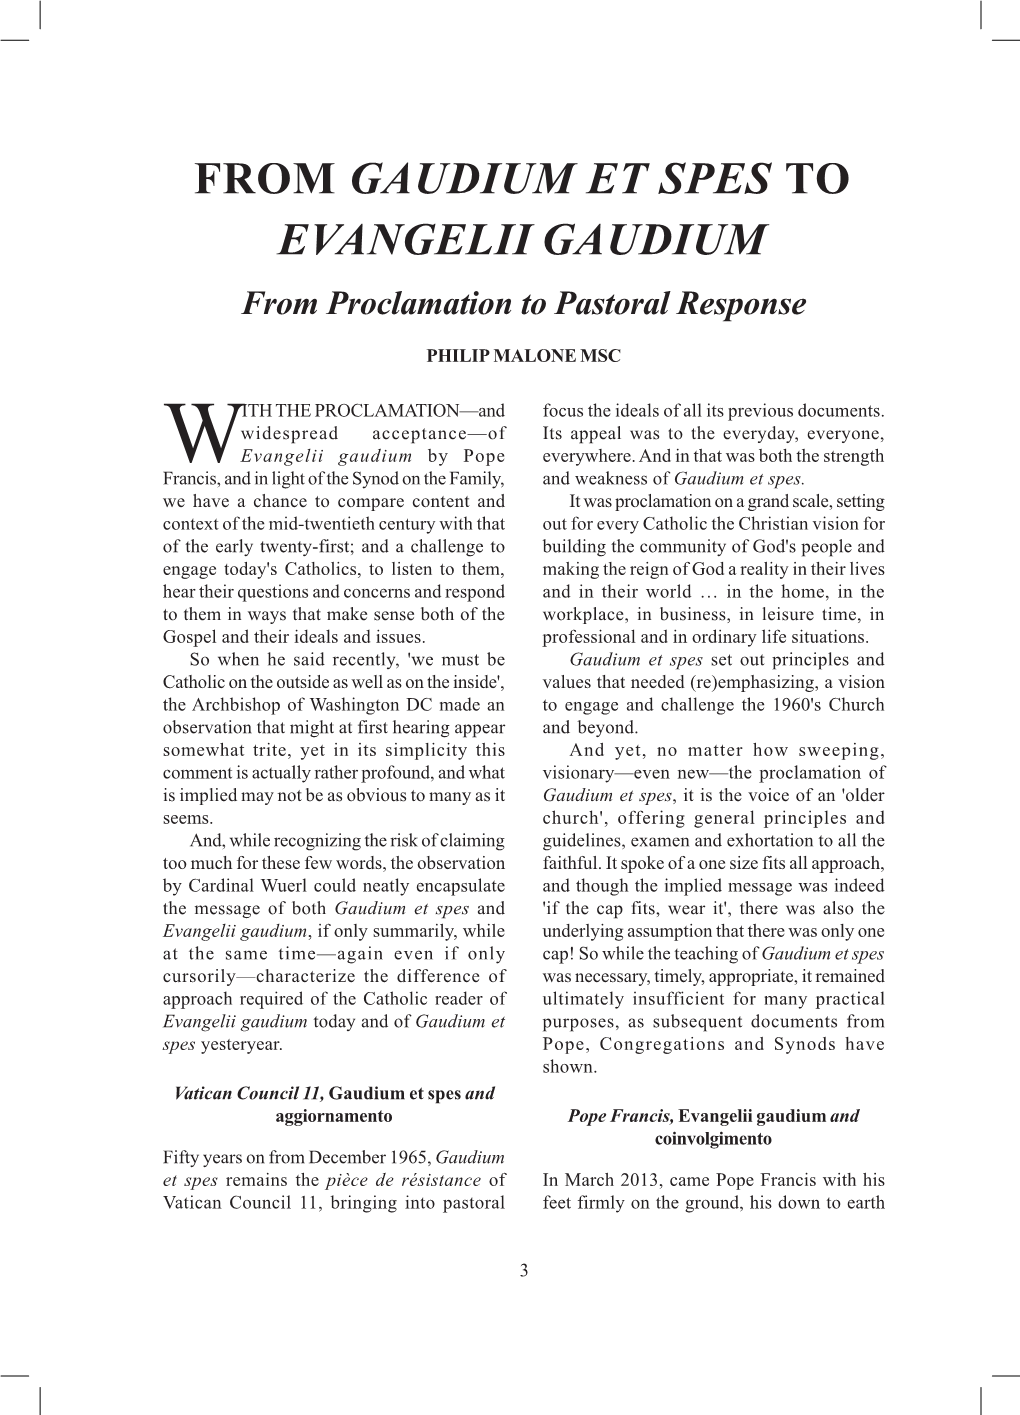 FROM GAUDIUM ET SPES to EVANGELII GAUDIUM from Proclamation to Pastoral Response